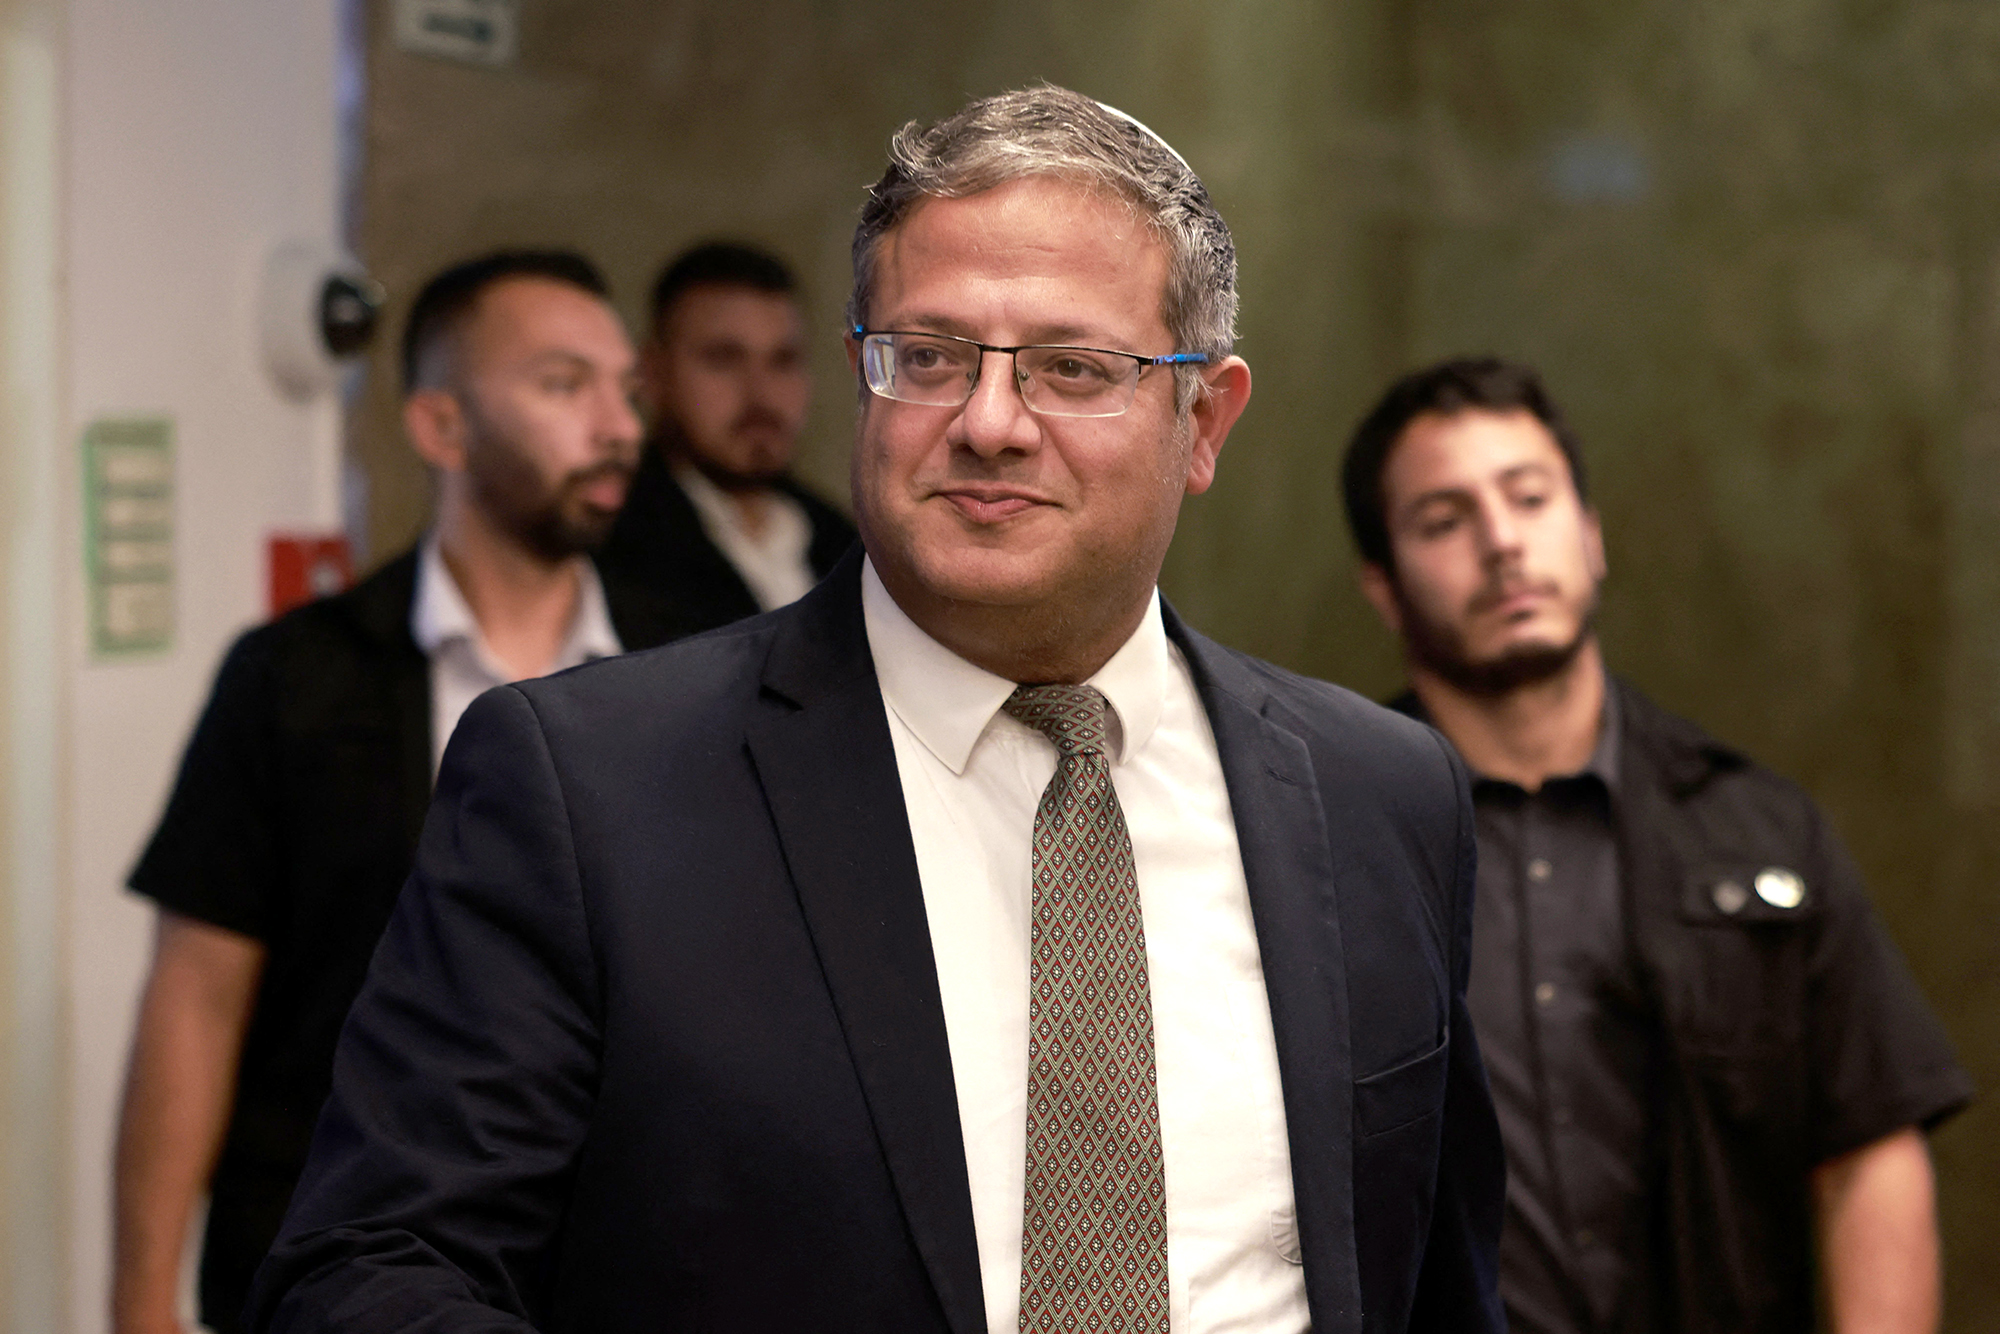 Israel's National Security Minister Itamar Ben-Gvir arrives for a cabinet meeting at the prime minister's office in Jerusalem on August 27.